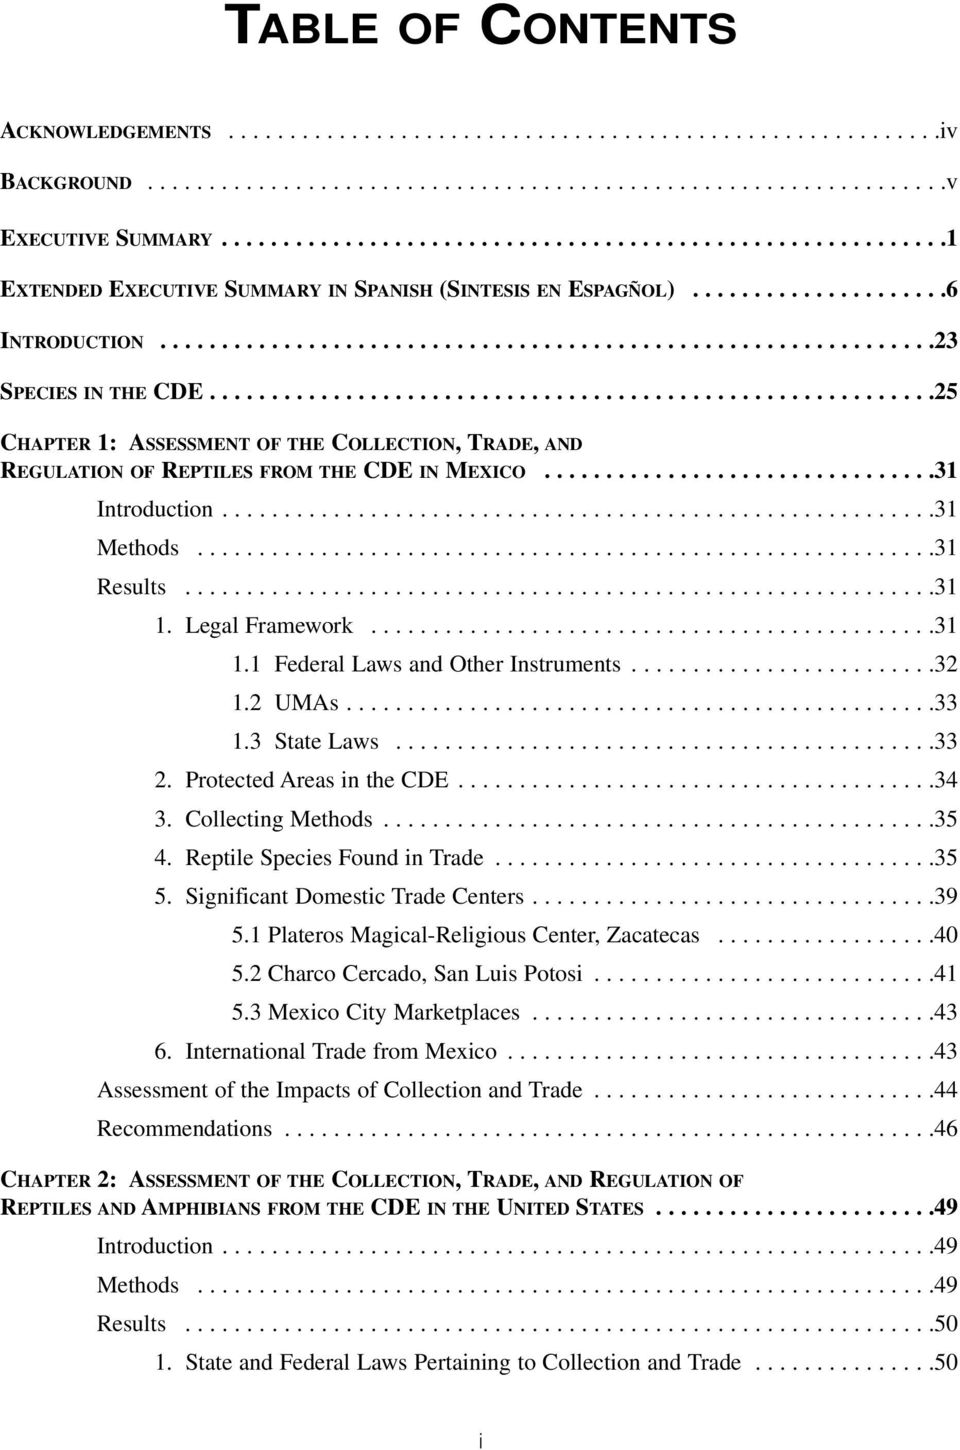 ..........................................................25 CHAPTER 1: ASSESSMENT OF THE COLLECTION, TRADE, AND REGULATION OF REPTILES FROM THE CDE IN MEXICO................................31 Introduction.